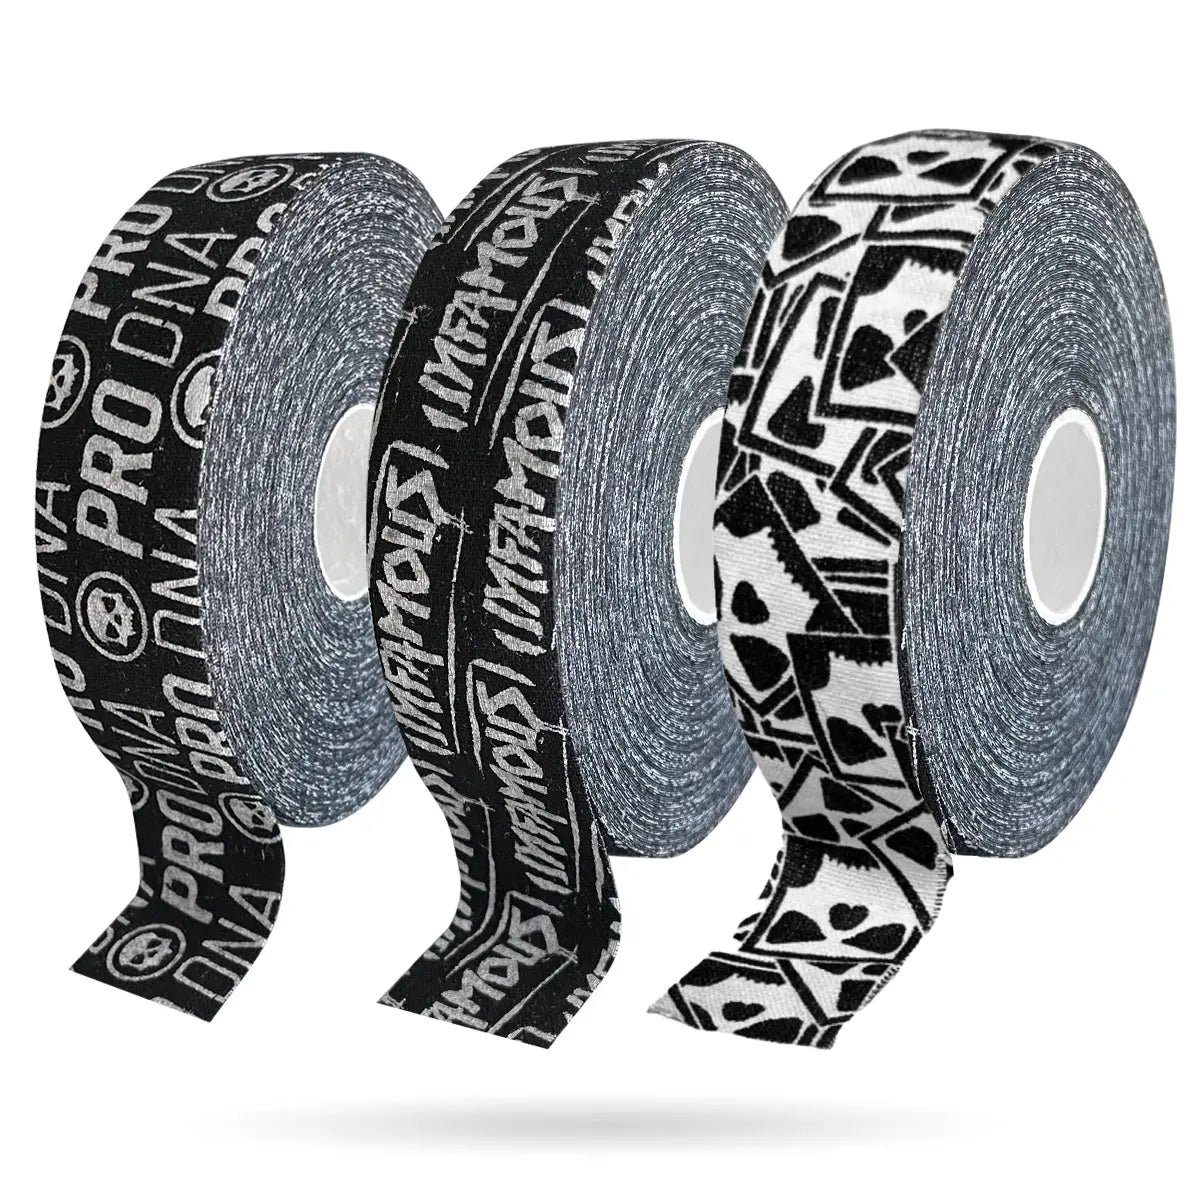 Player Pack Tape Bundle - 3 Pack